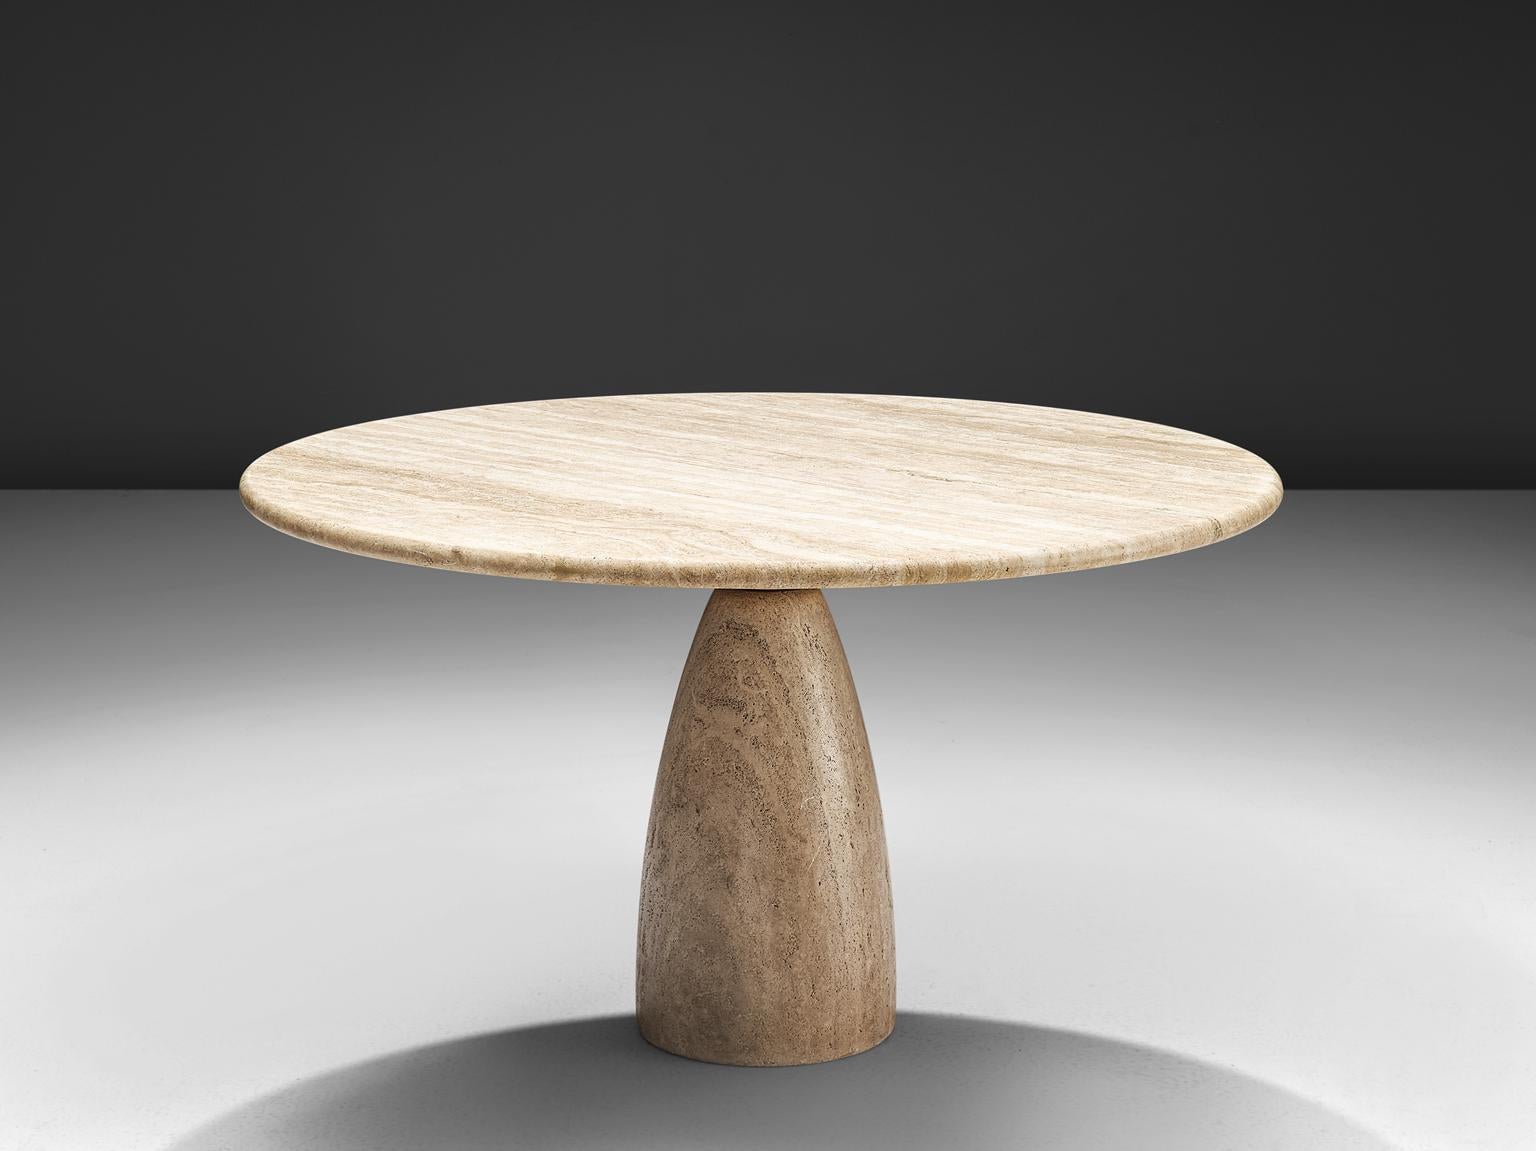 Peter Draenert for Draenert, “Finale 1790” solid travertine table, travertine, Germany, 1970s.

This very heavy solid travertine dining table by Peter Draenert features a volumuous cone-shaped pedestal with a thick circular tabletop. The